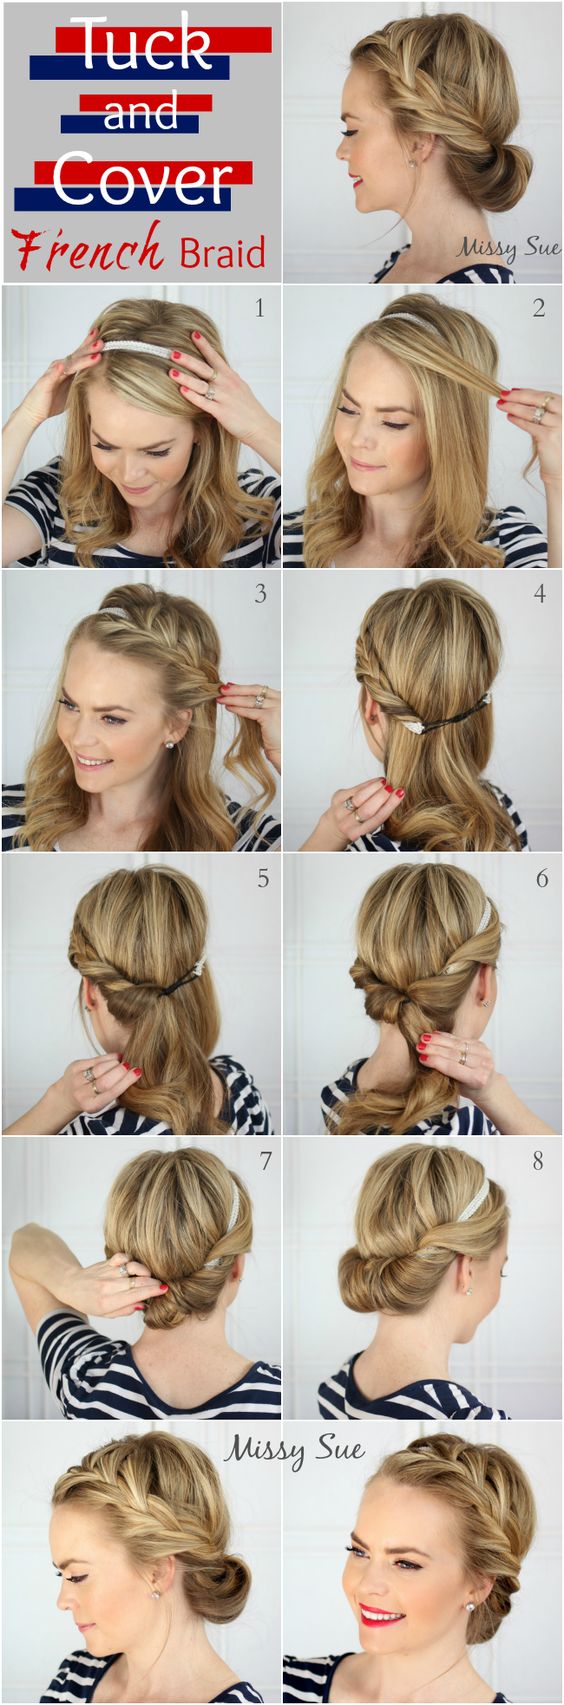 How to get the 'Instagram Waves' hairstyle in 3 simple steps | Be Beautiful  India